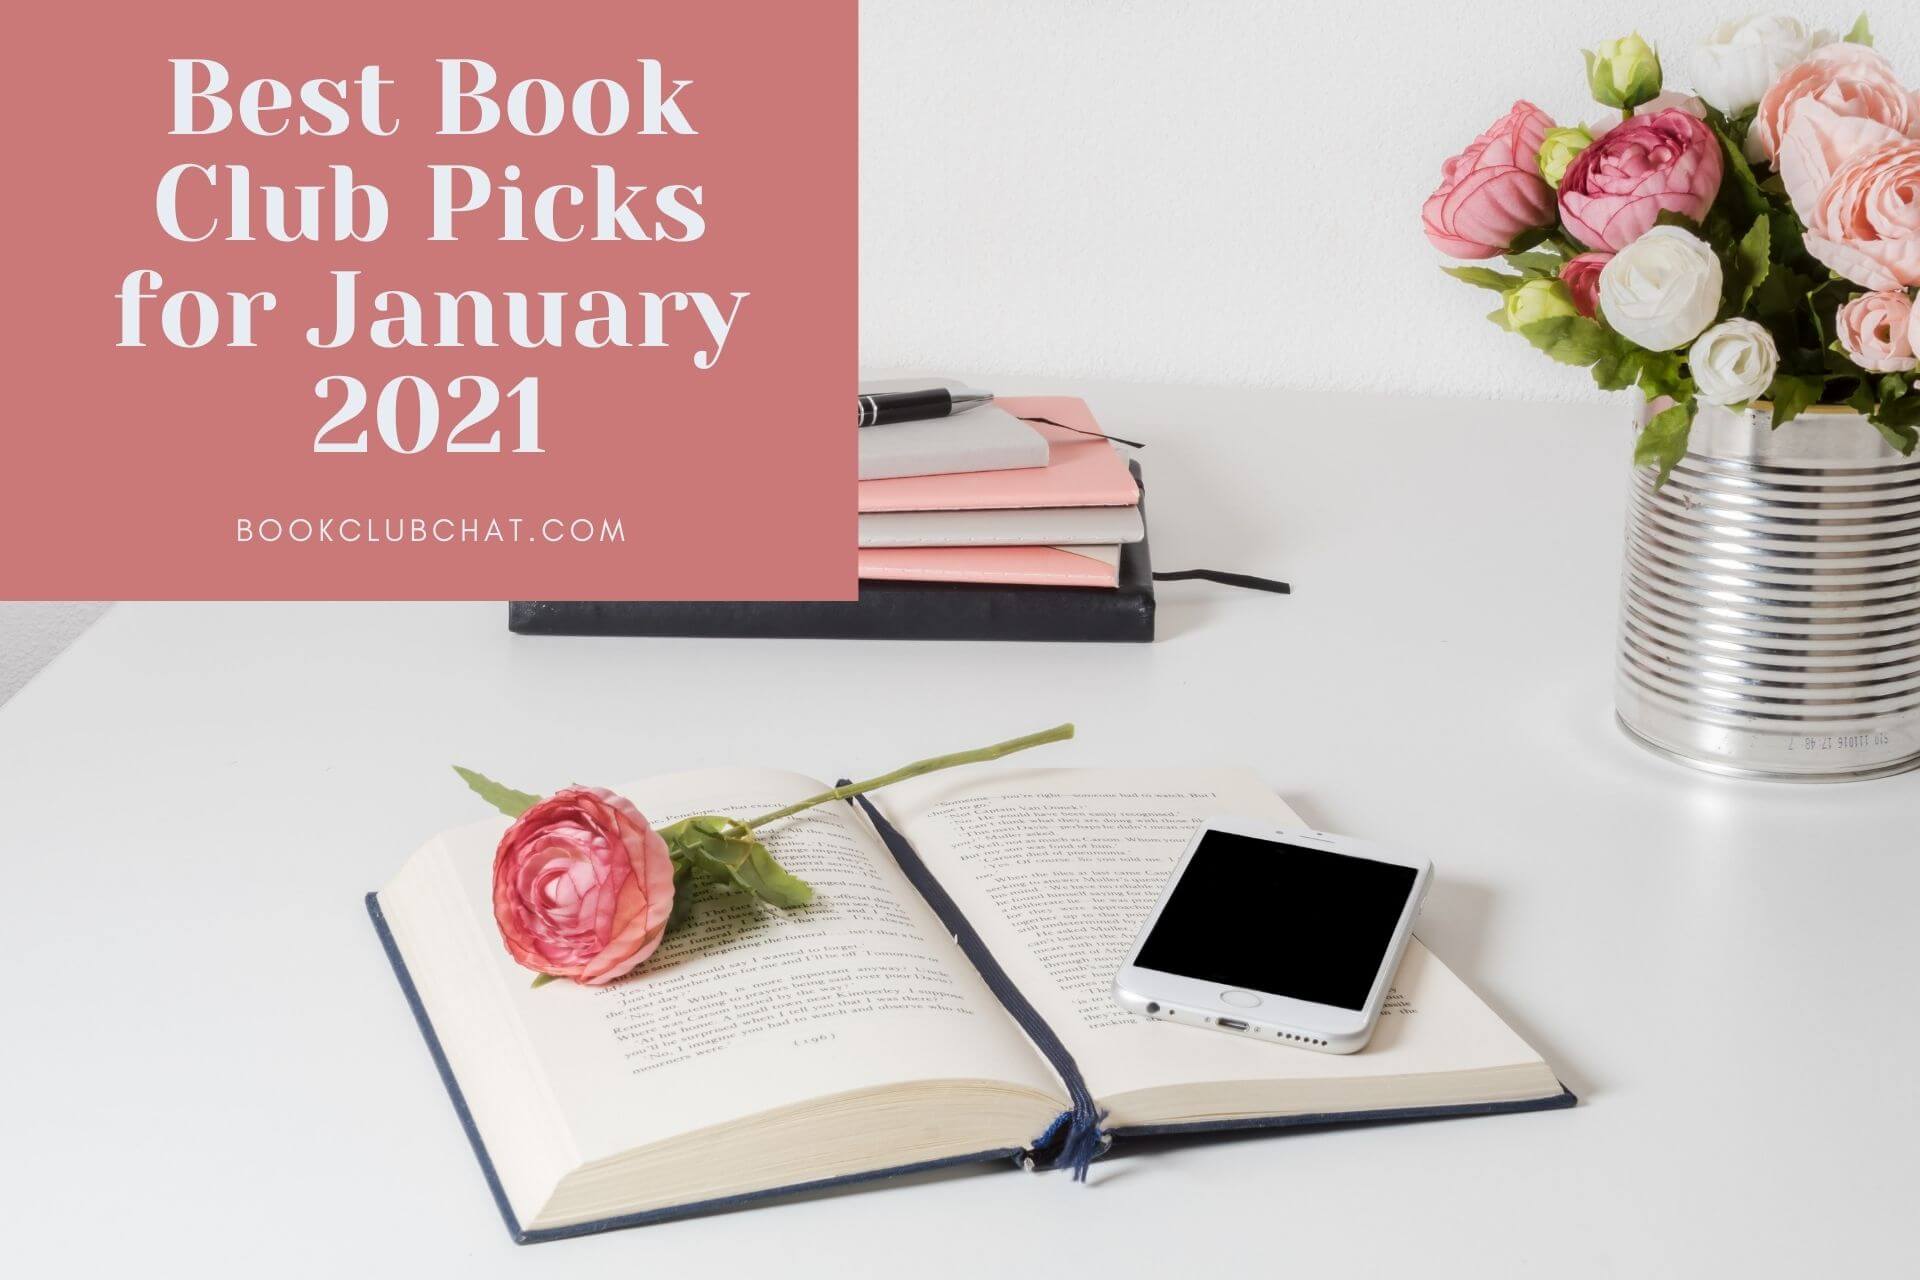 Best Book Club Picks for January 2021